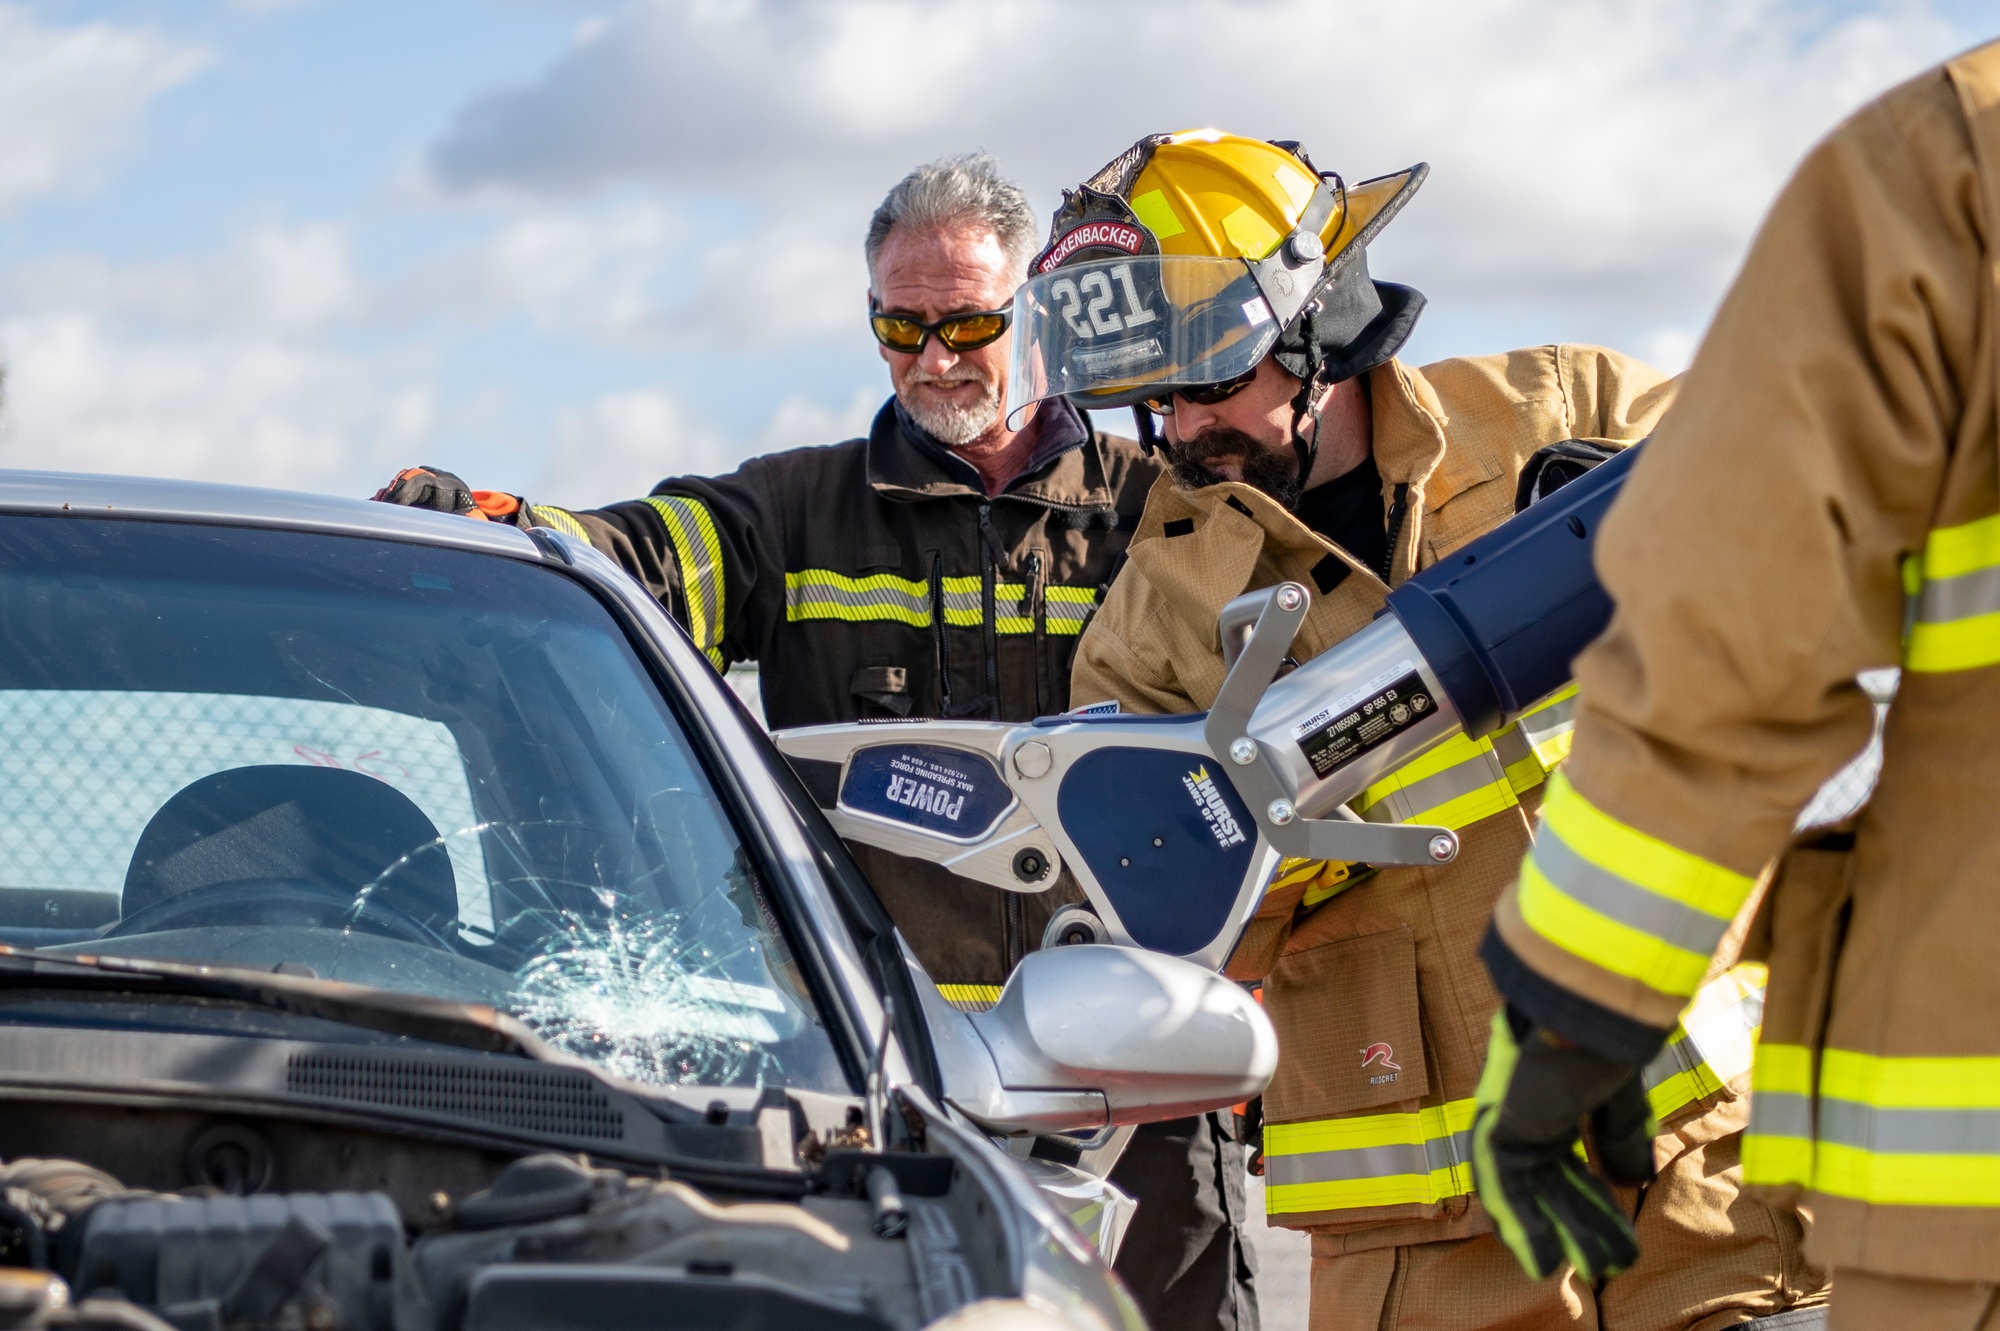 DVIDS - Images - Rickenbacker Fire Department Jaws of Life